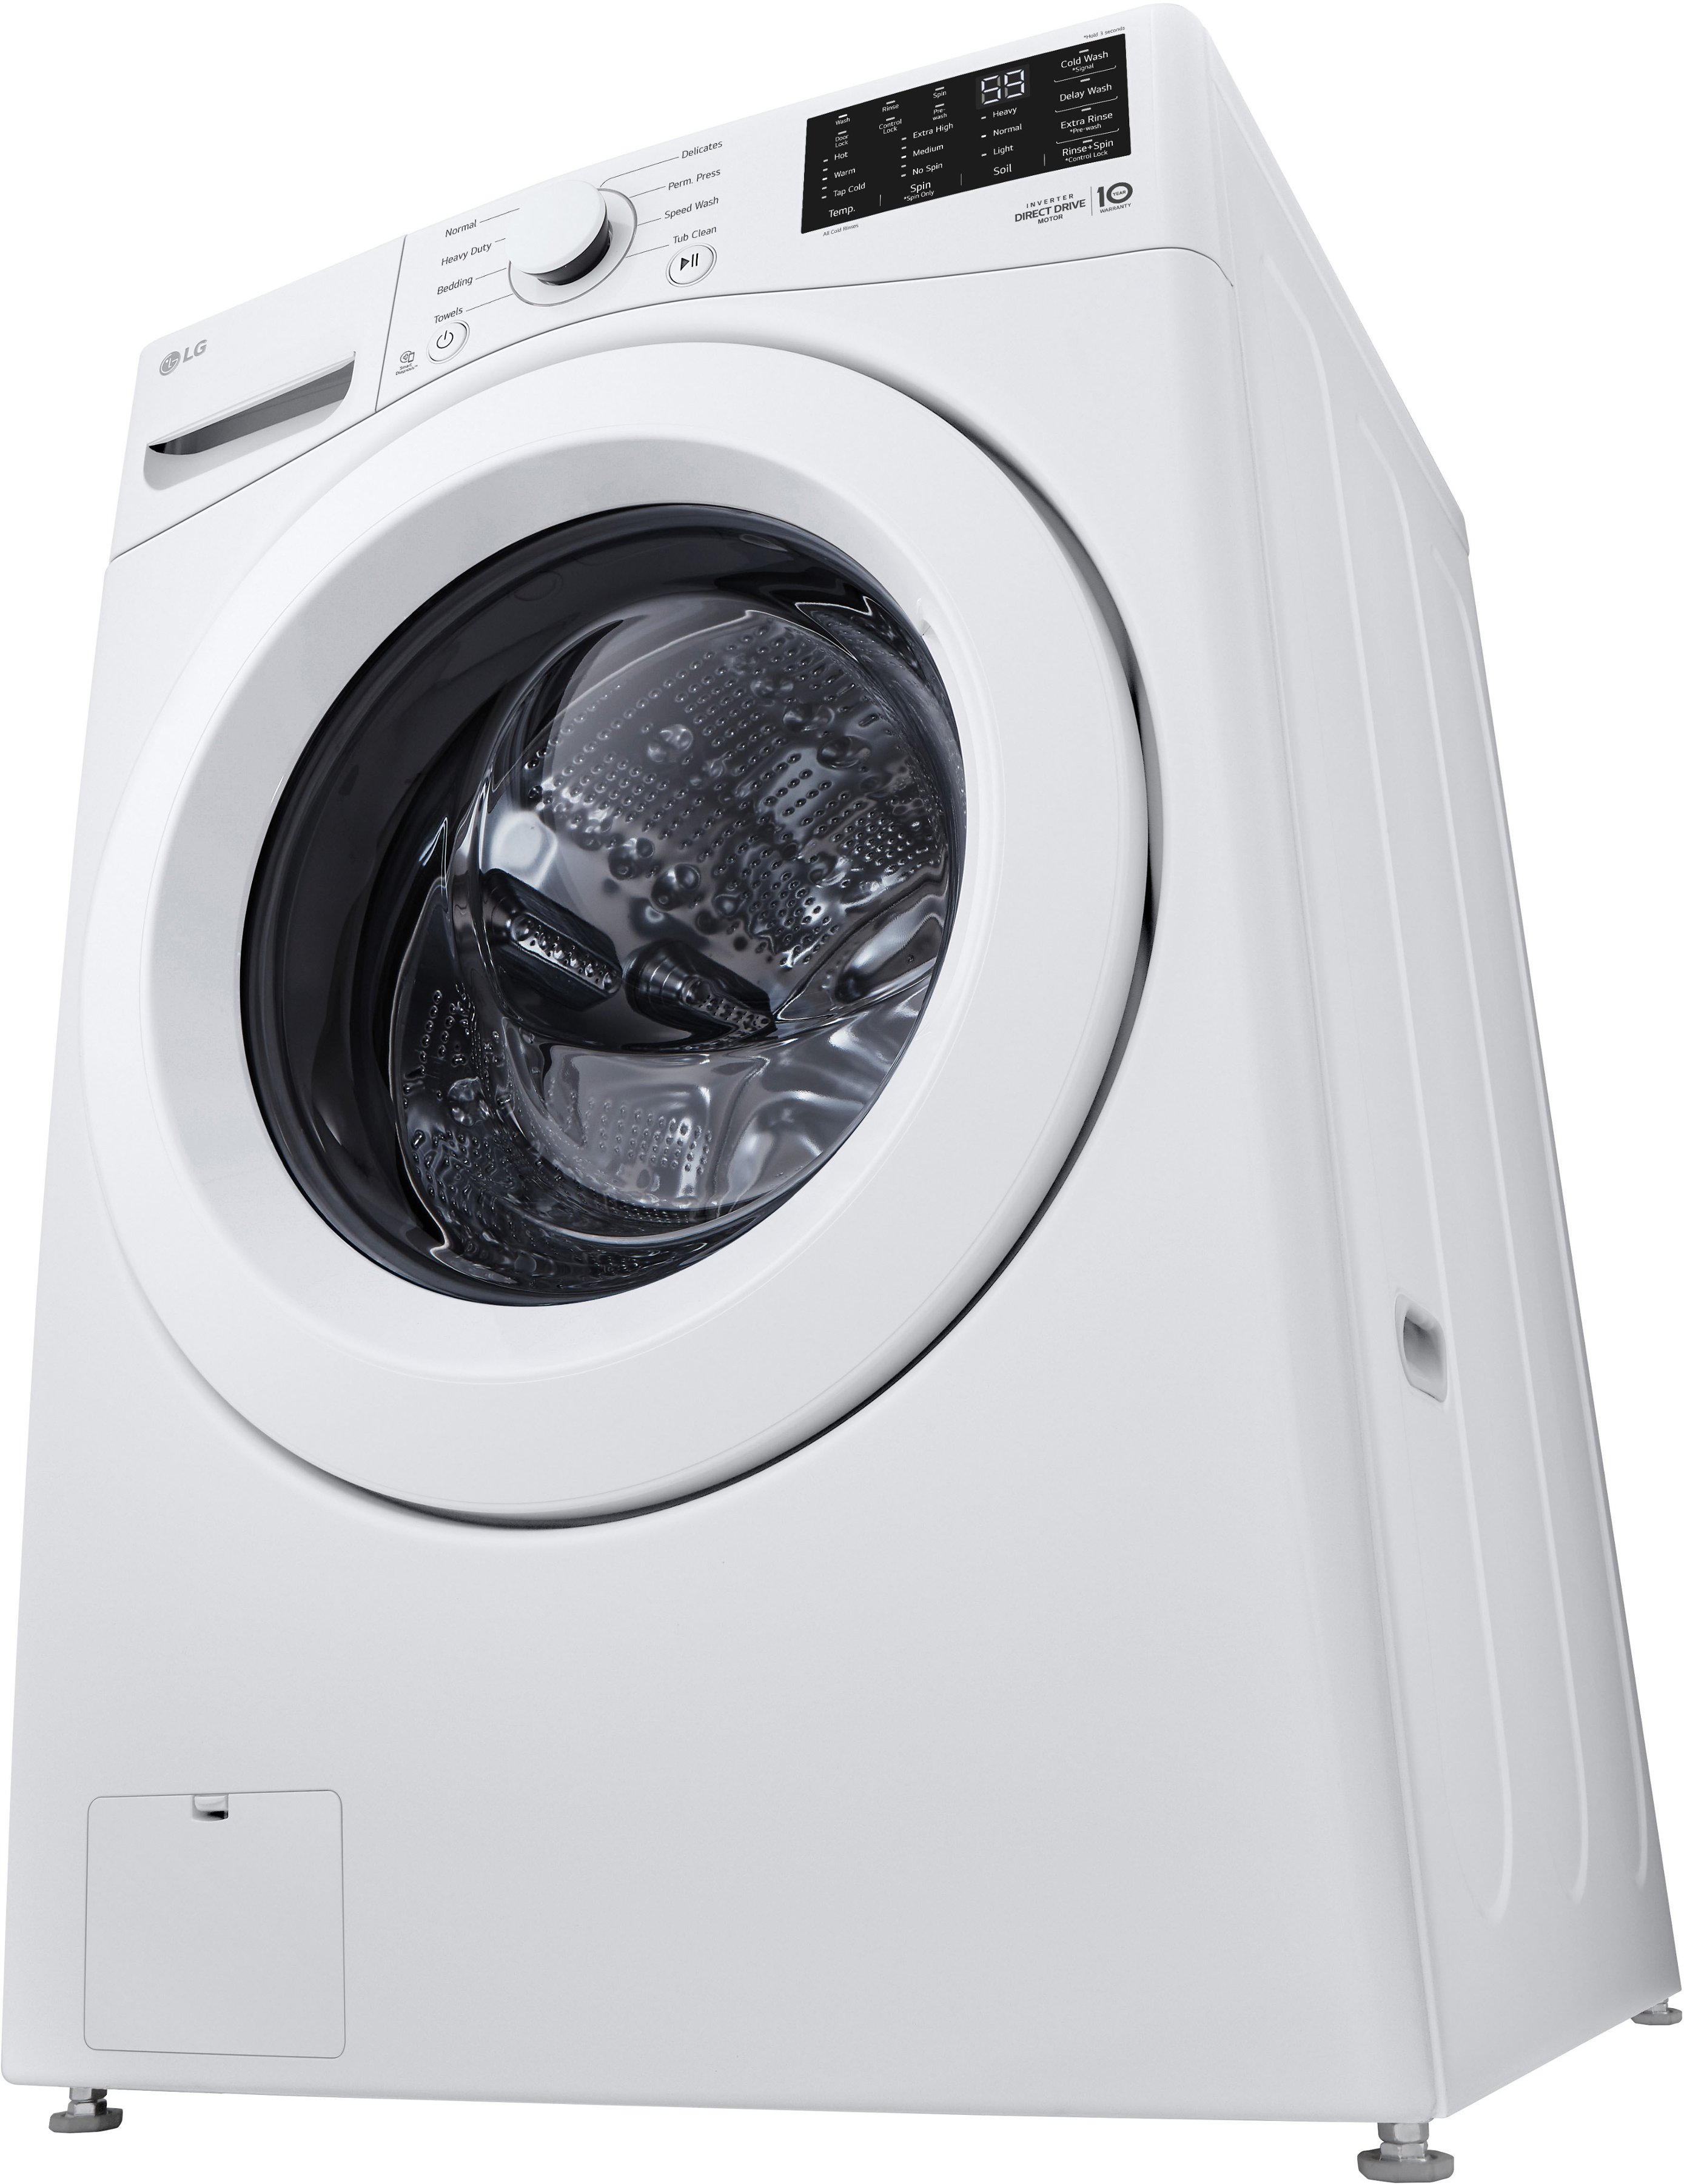 LG 5.0 Cu. Ft. High-Efficiency Front Load Washer with 6Motion Technology  White WM3470CW - Best Buy